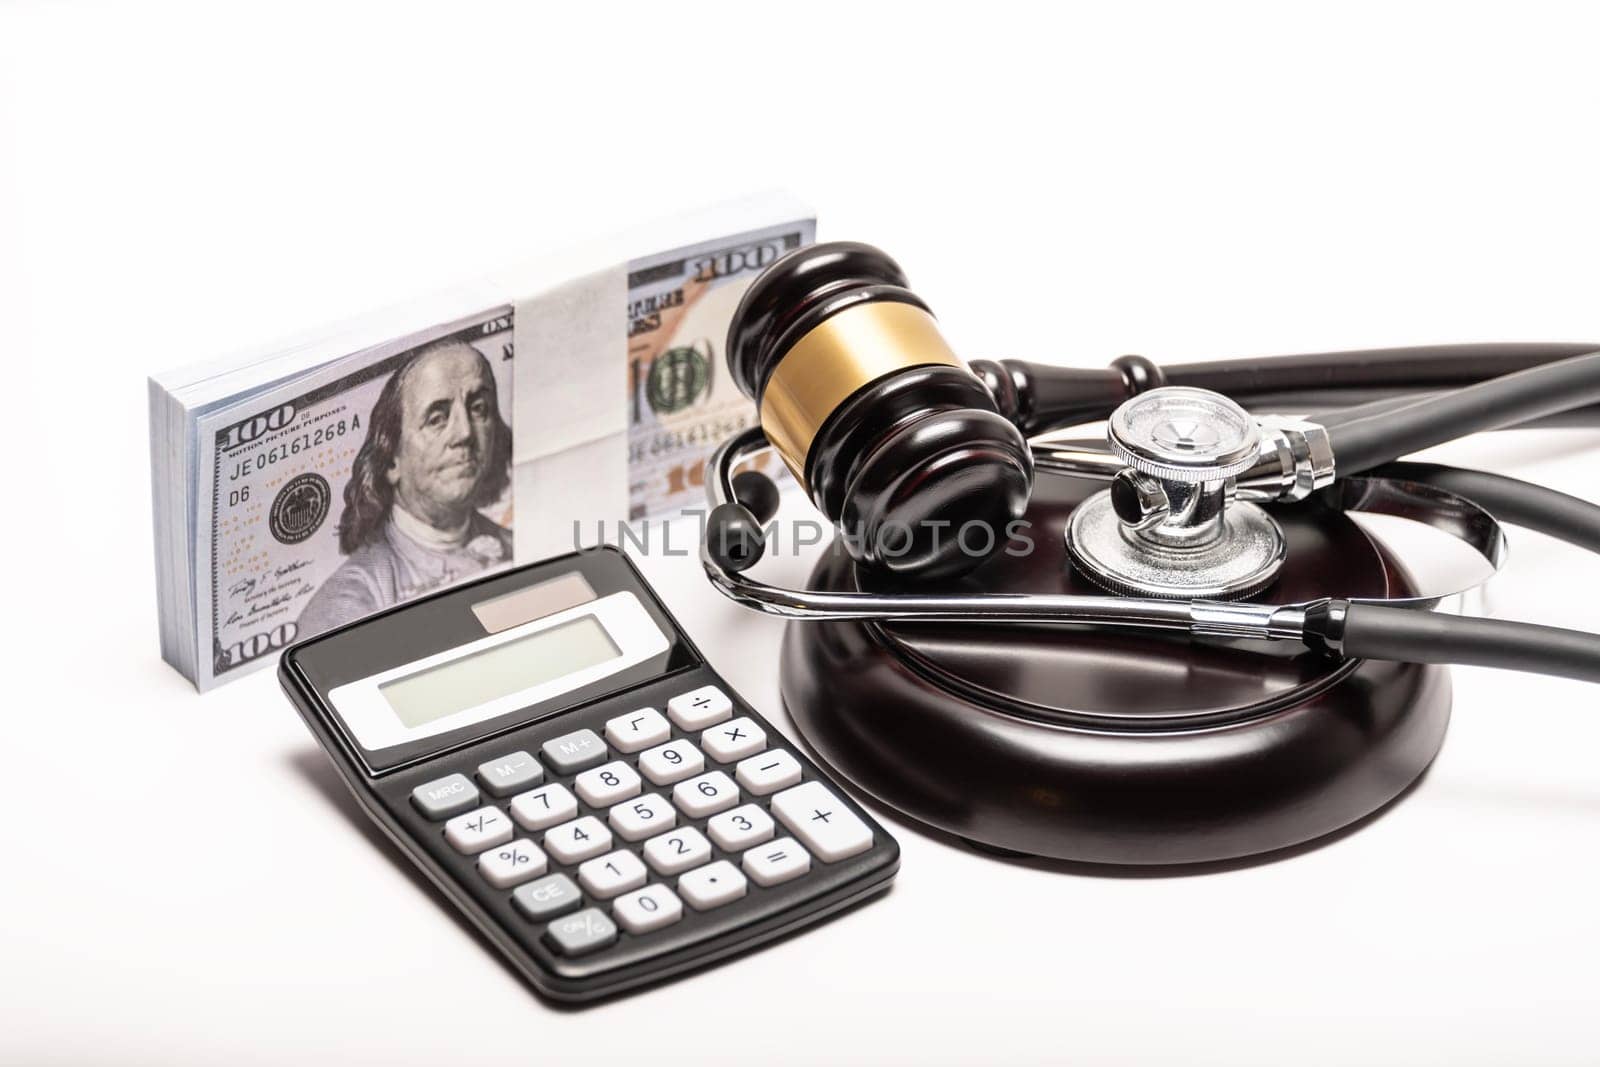 A conceptual image featuring a gavel, cash, and stethoscope symbolizing medical malpractice litigation. by jbruiz78